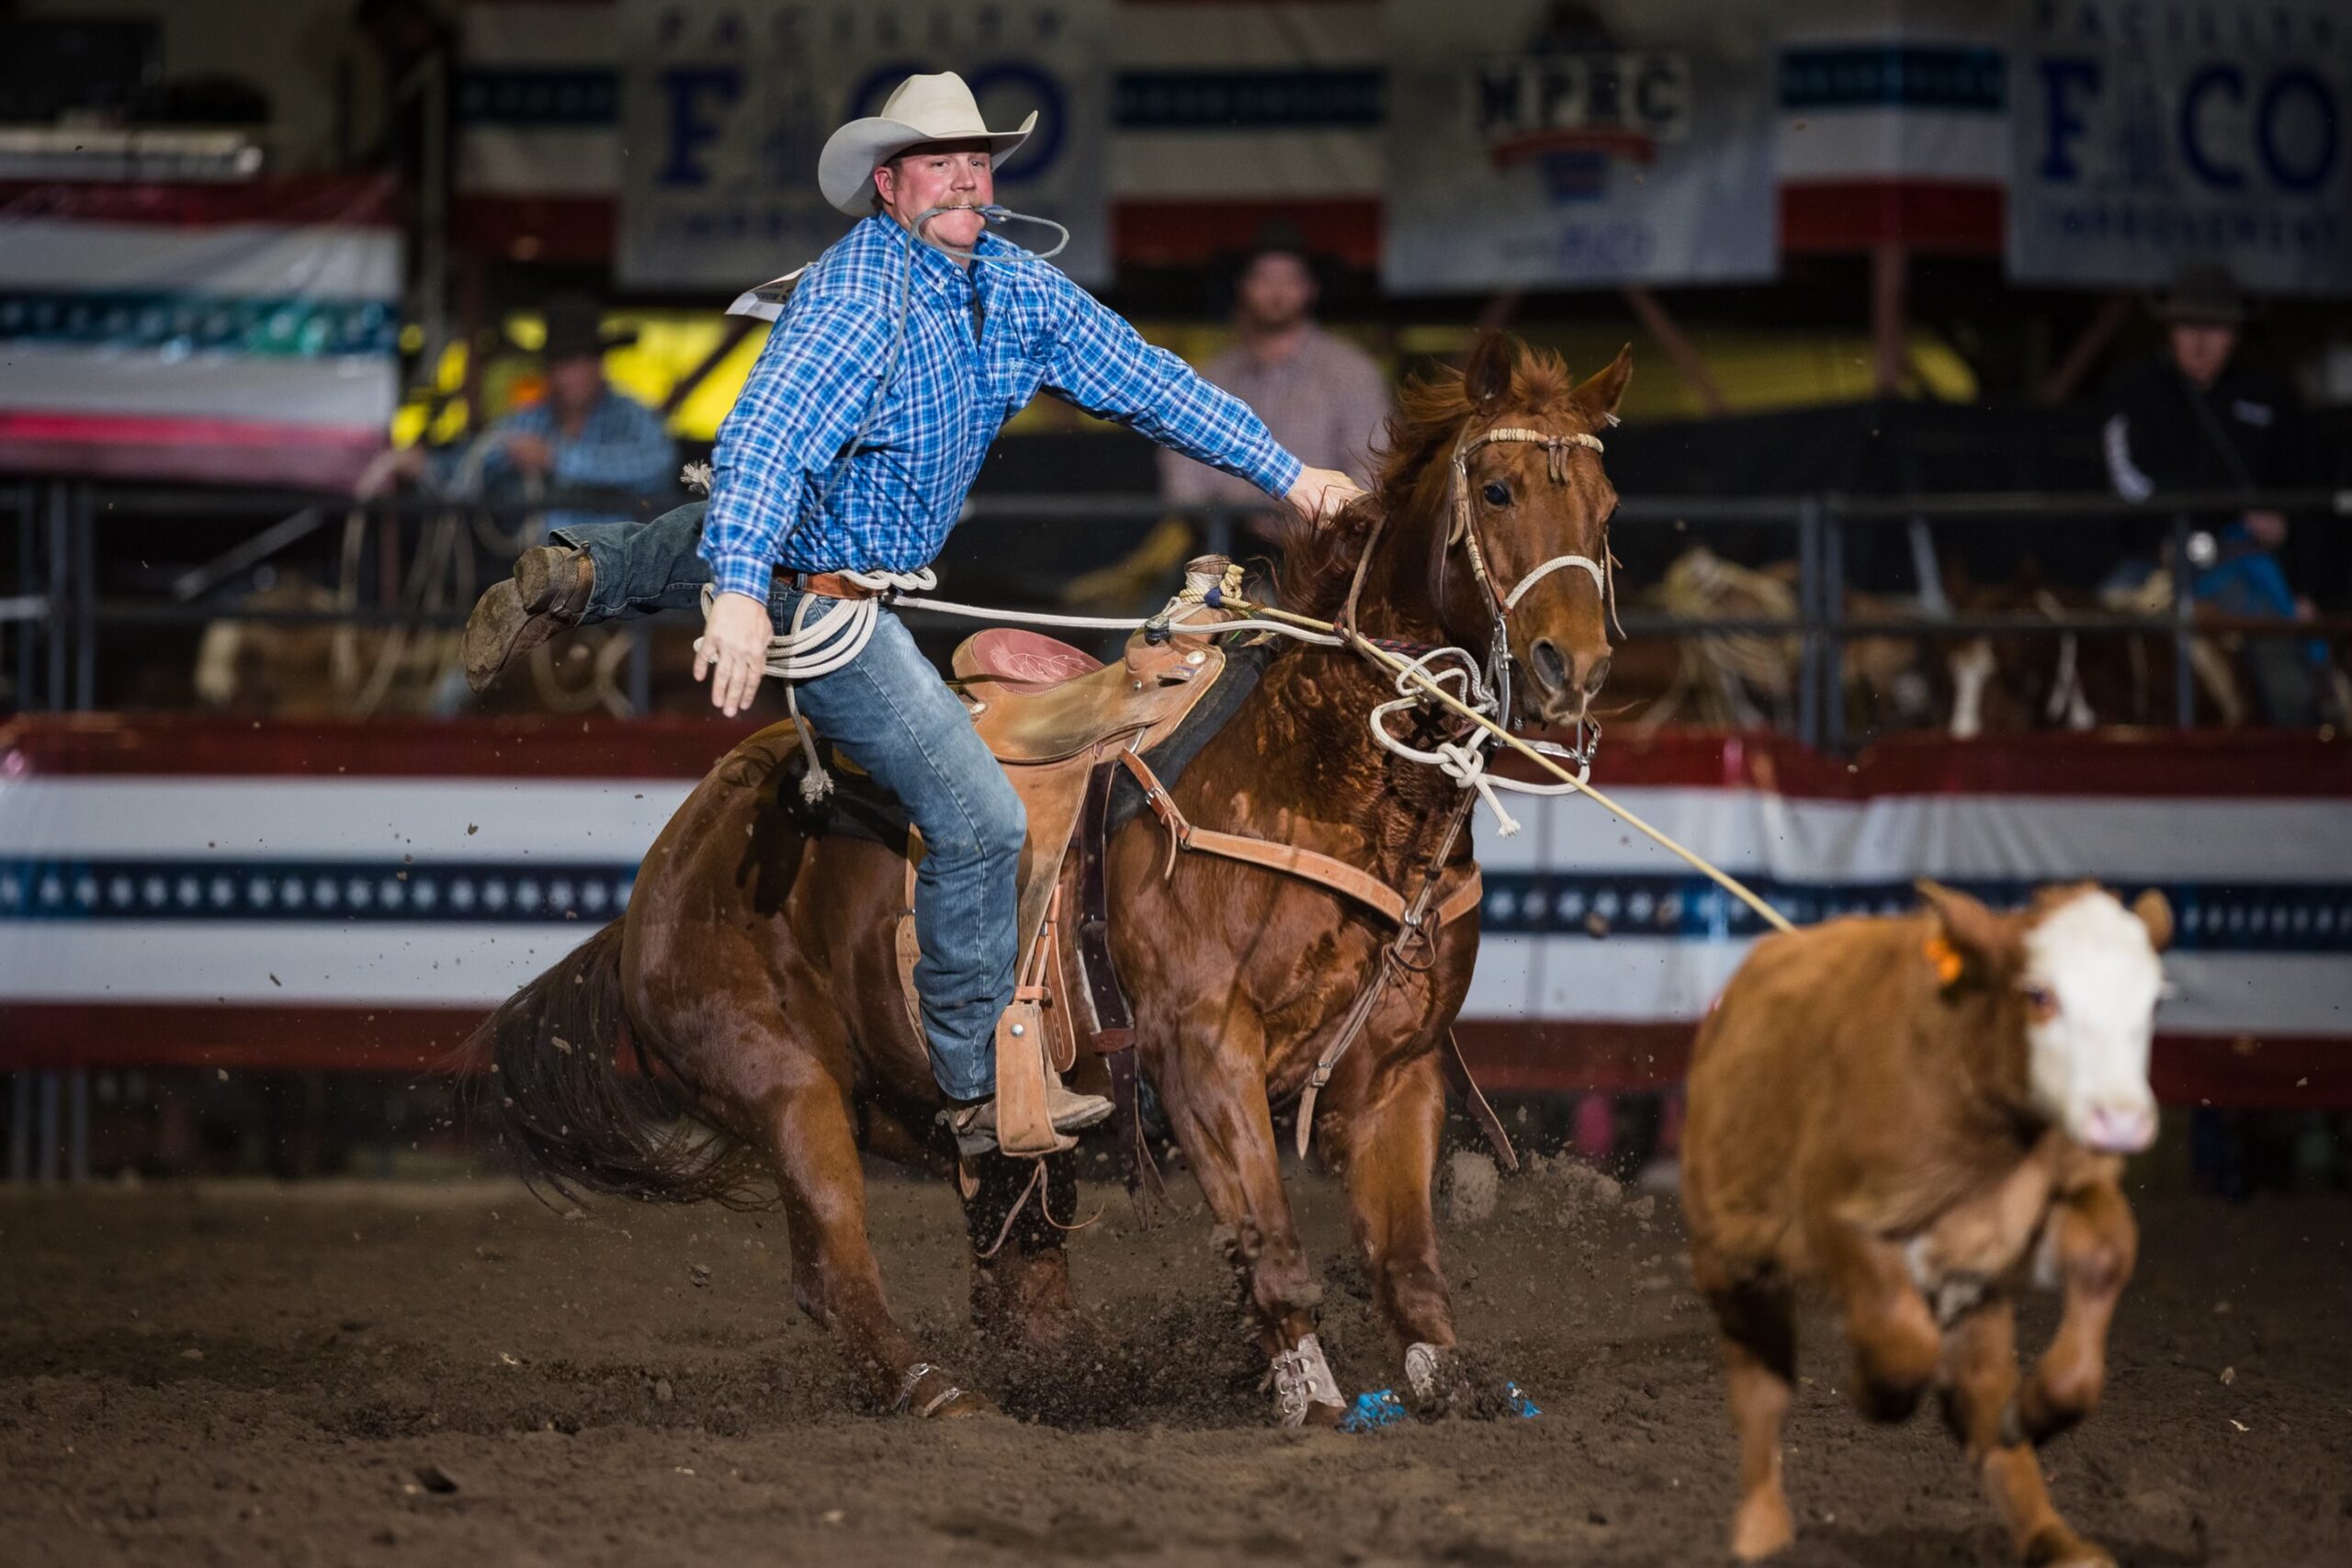 Ben Ayre is the poster boy for ProRodeo circuit action—holding down a handful of jobs while finding time to rodeo.